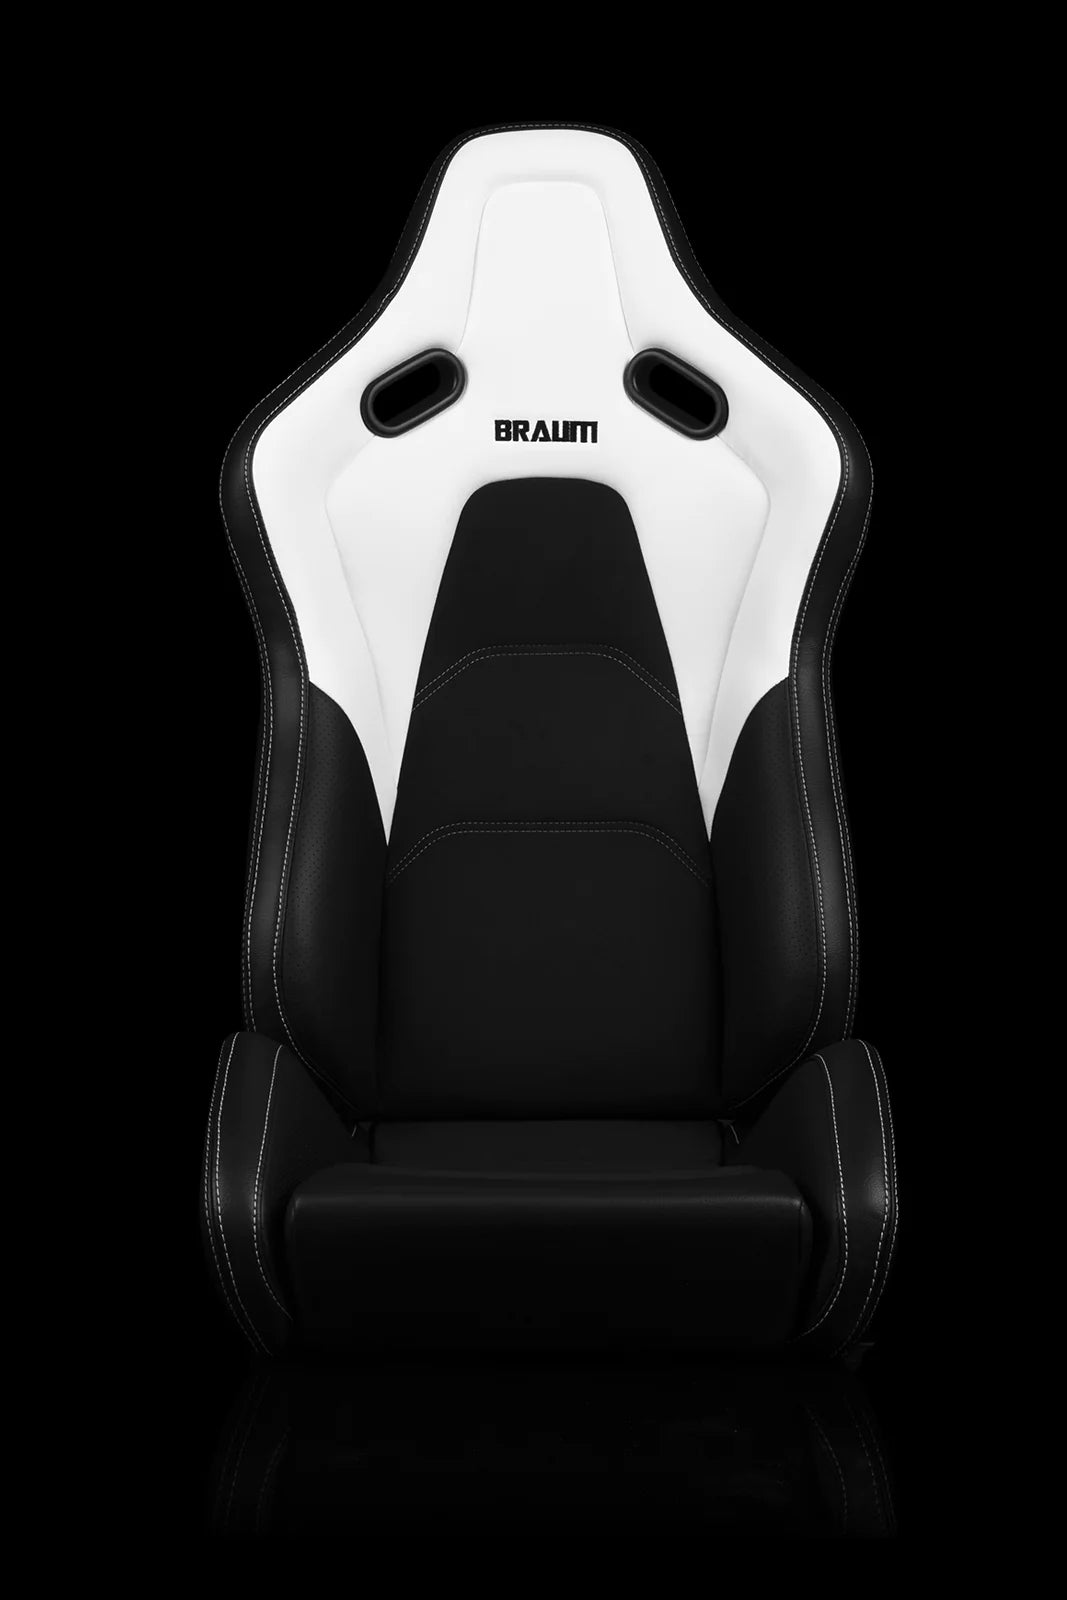 BRAUM FALCON-S Series Reclinable Composite Seats (White Leatherette | Alcantara Inserts | White Stitching) – Priced Per Pair